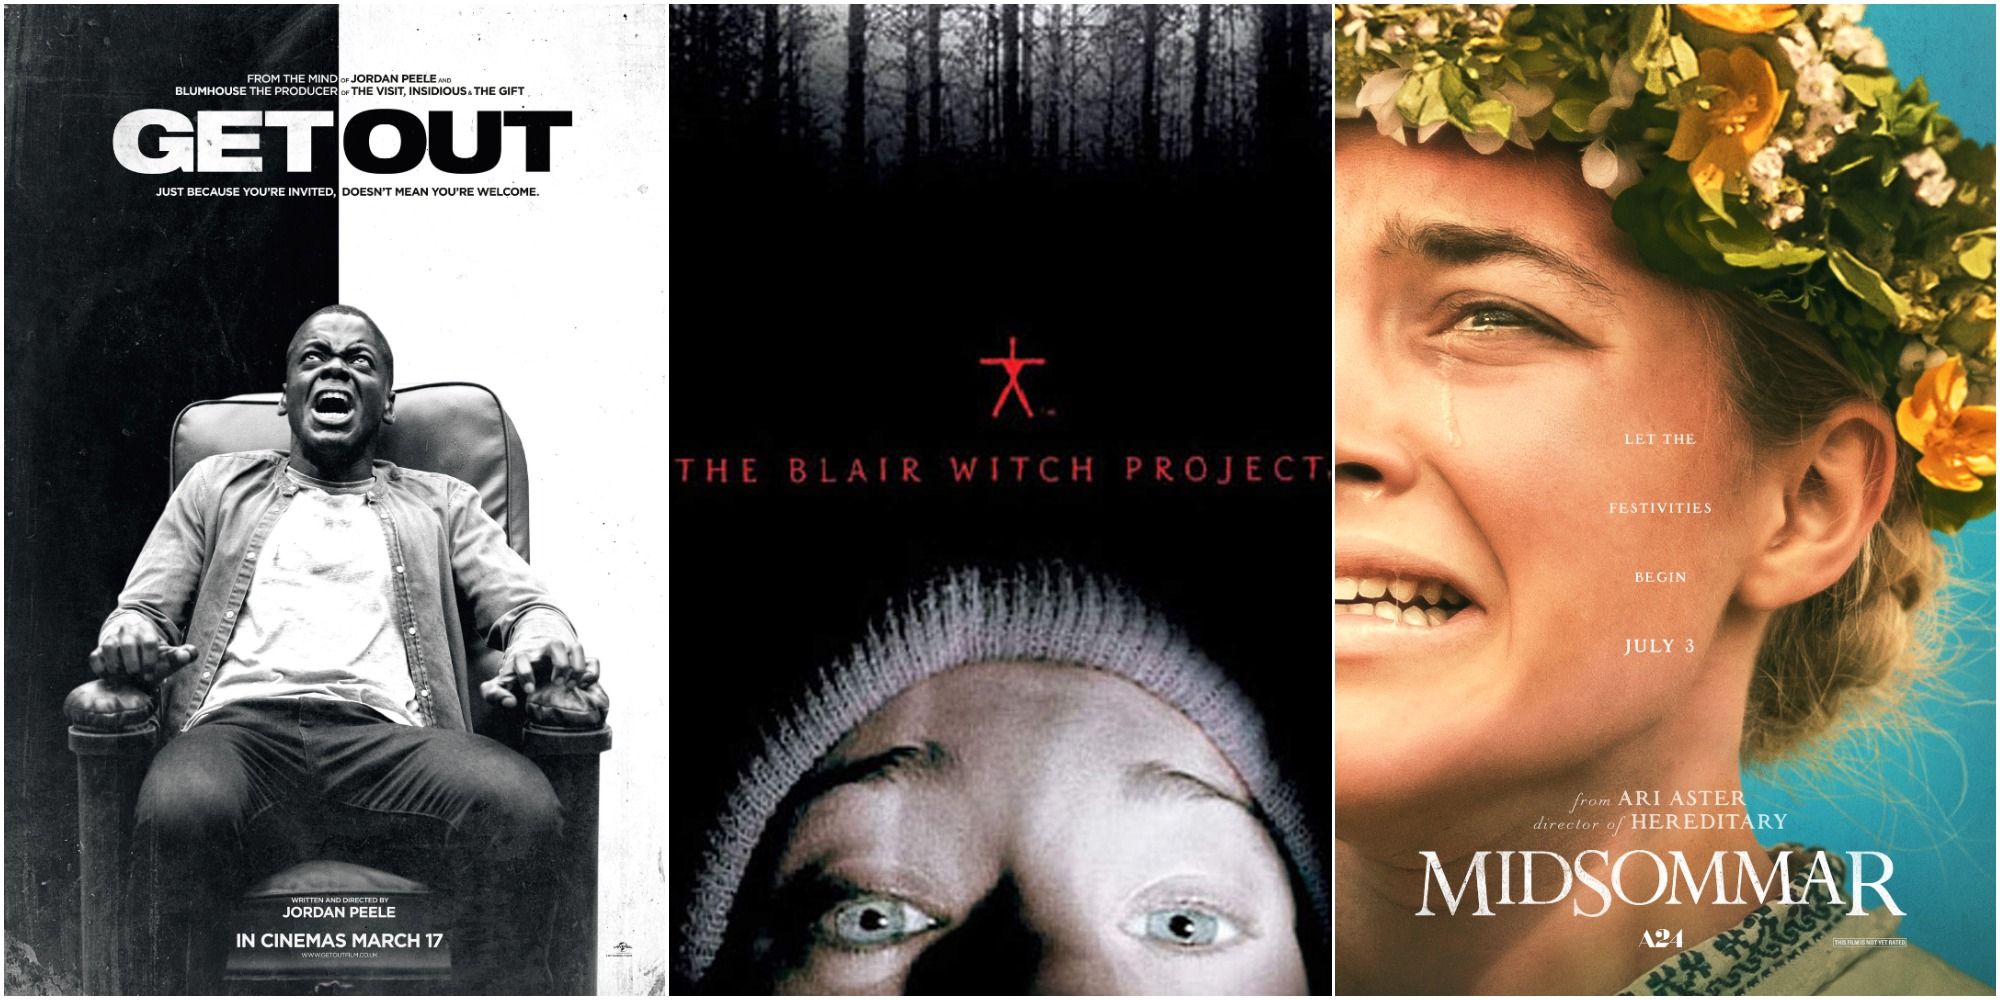 Get-Out-The-Blair-Witch-Project-Midsommar